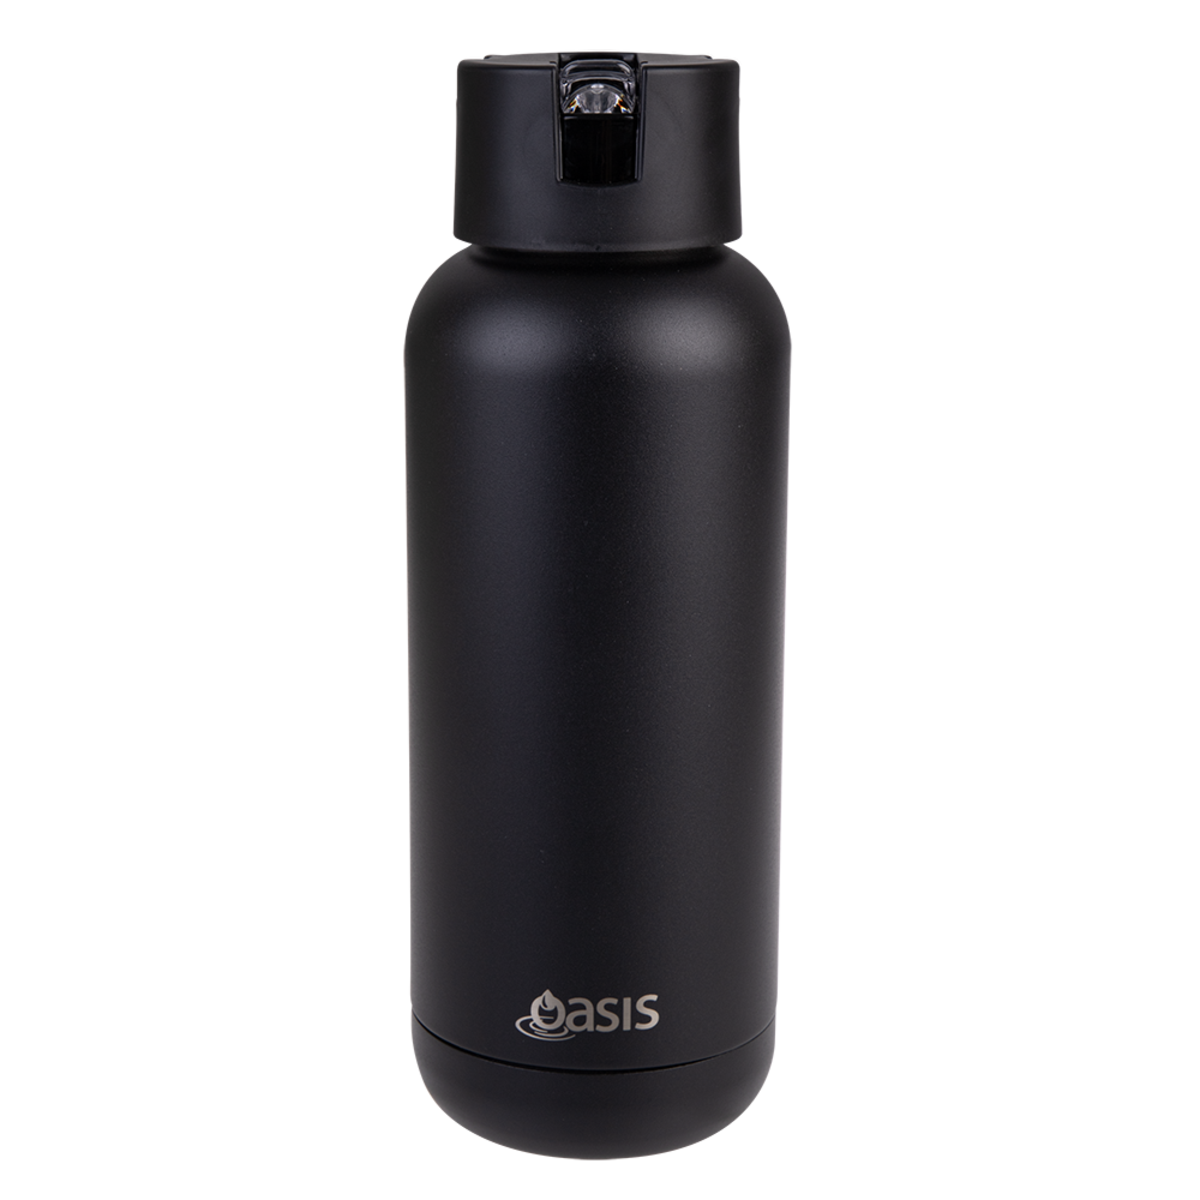 Oasis "moda" Ceramic Lined S/s Triple Wall Insulated Drink Bottle 1l - Black